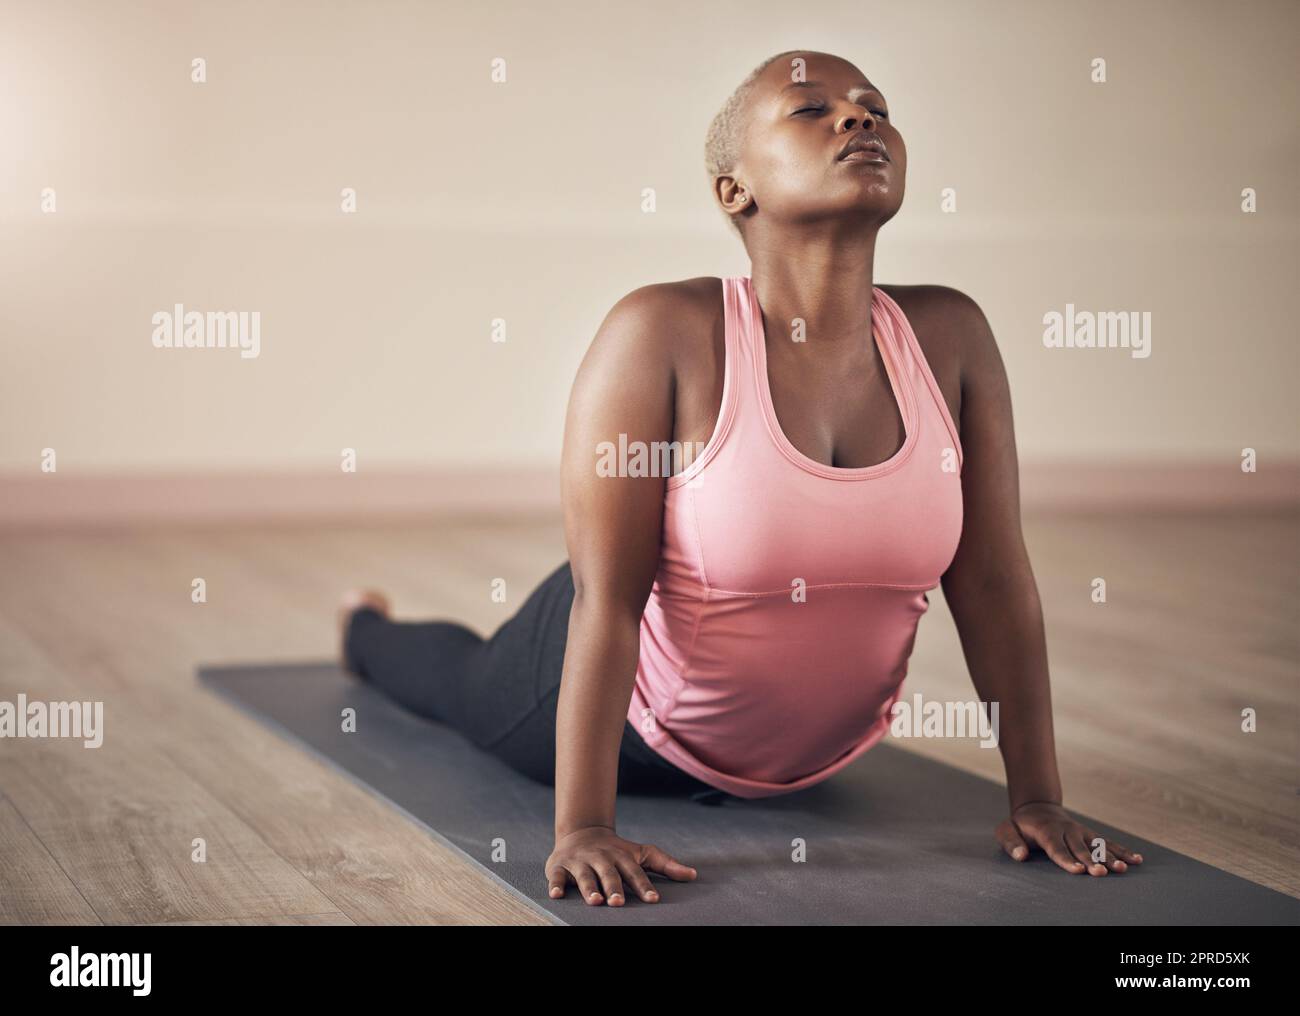 Taking care of my back. an attractive young woman holding an upward facing dog pose during an indoor yoga session alone. Stock Photo